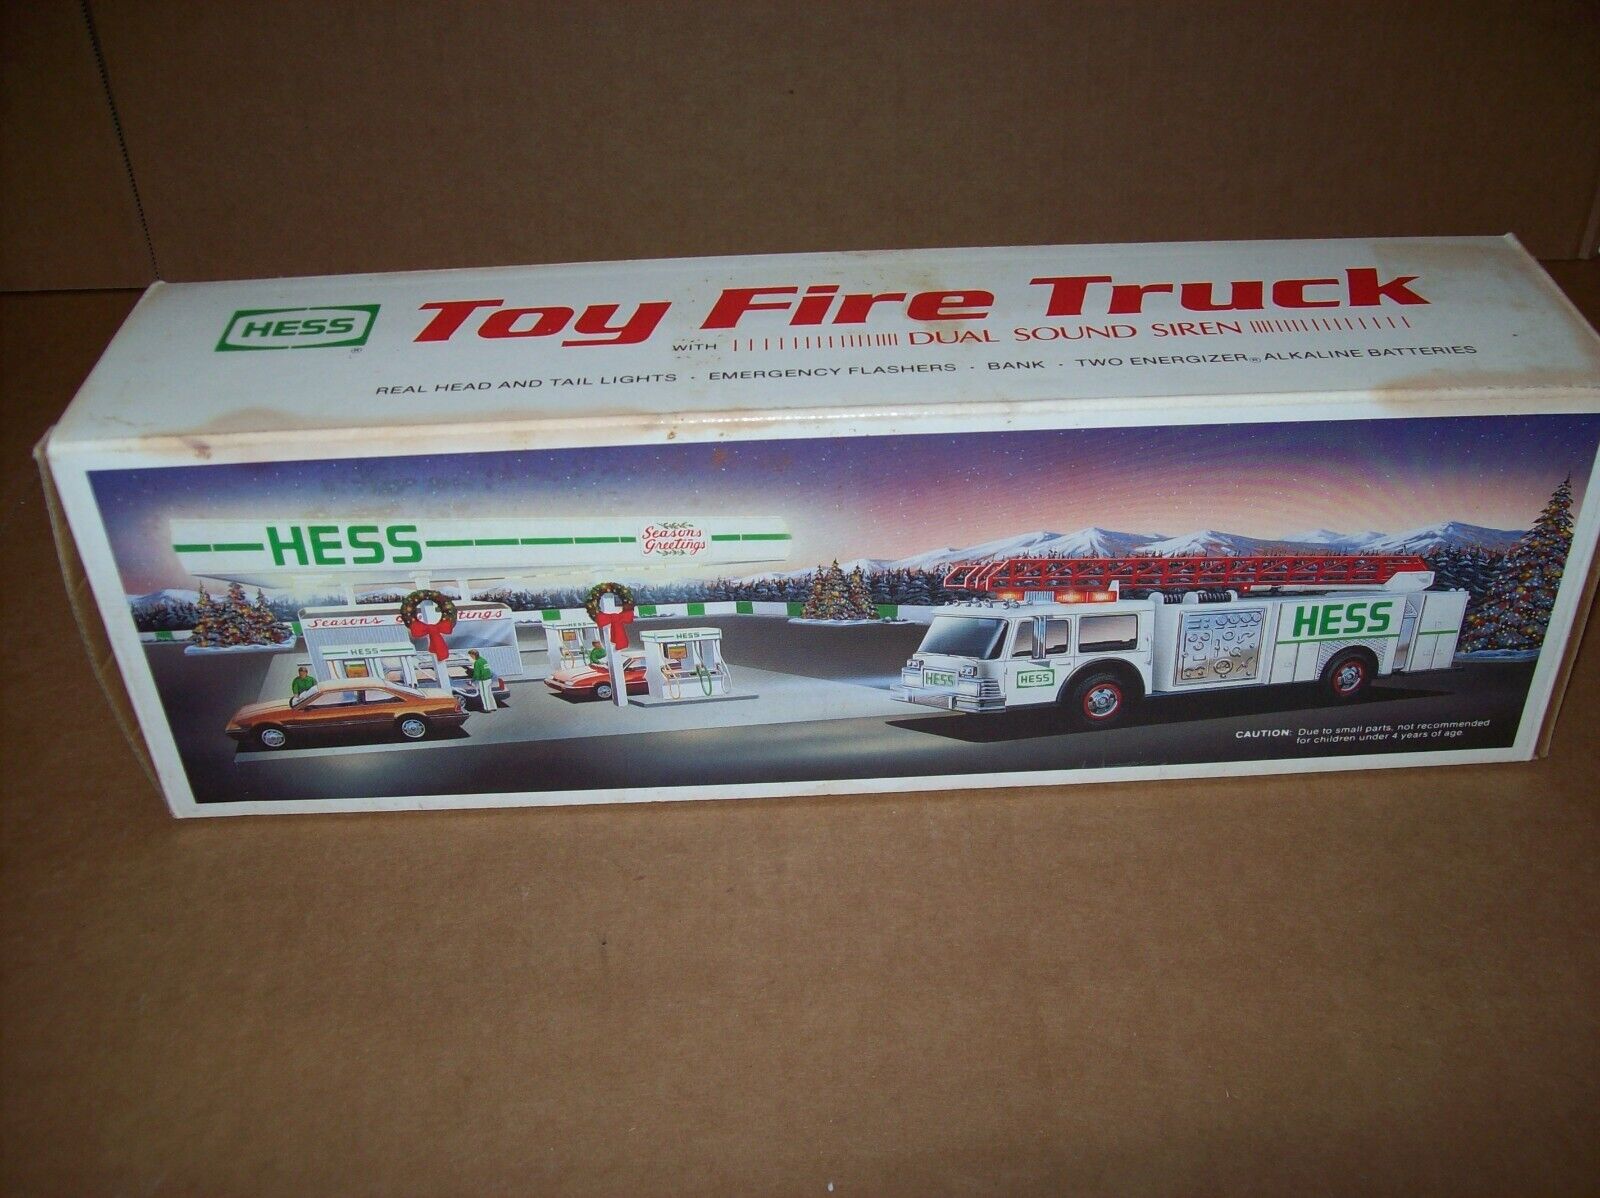 Vintage 1989 Hess Toy Fire Truck New open box